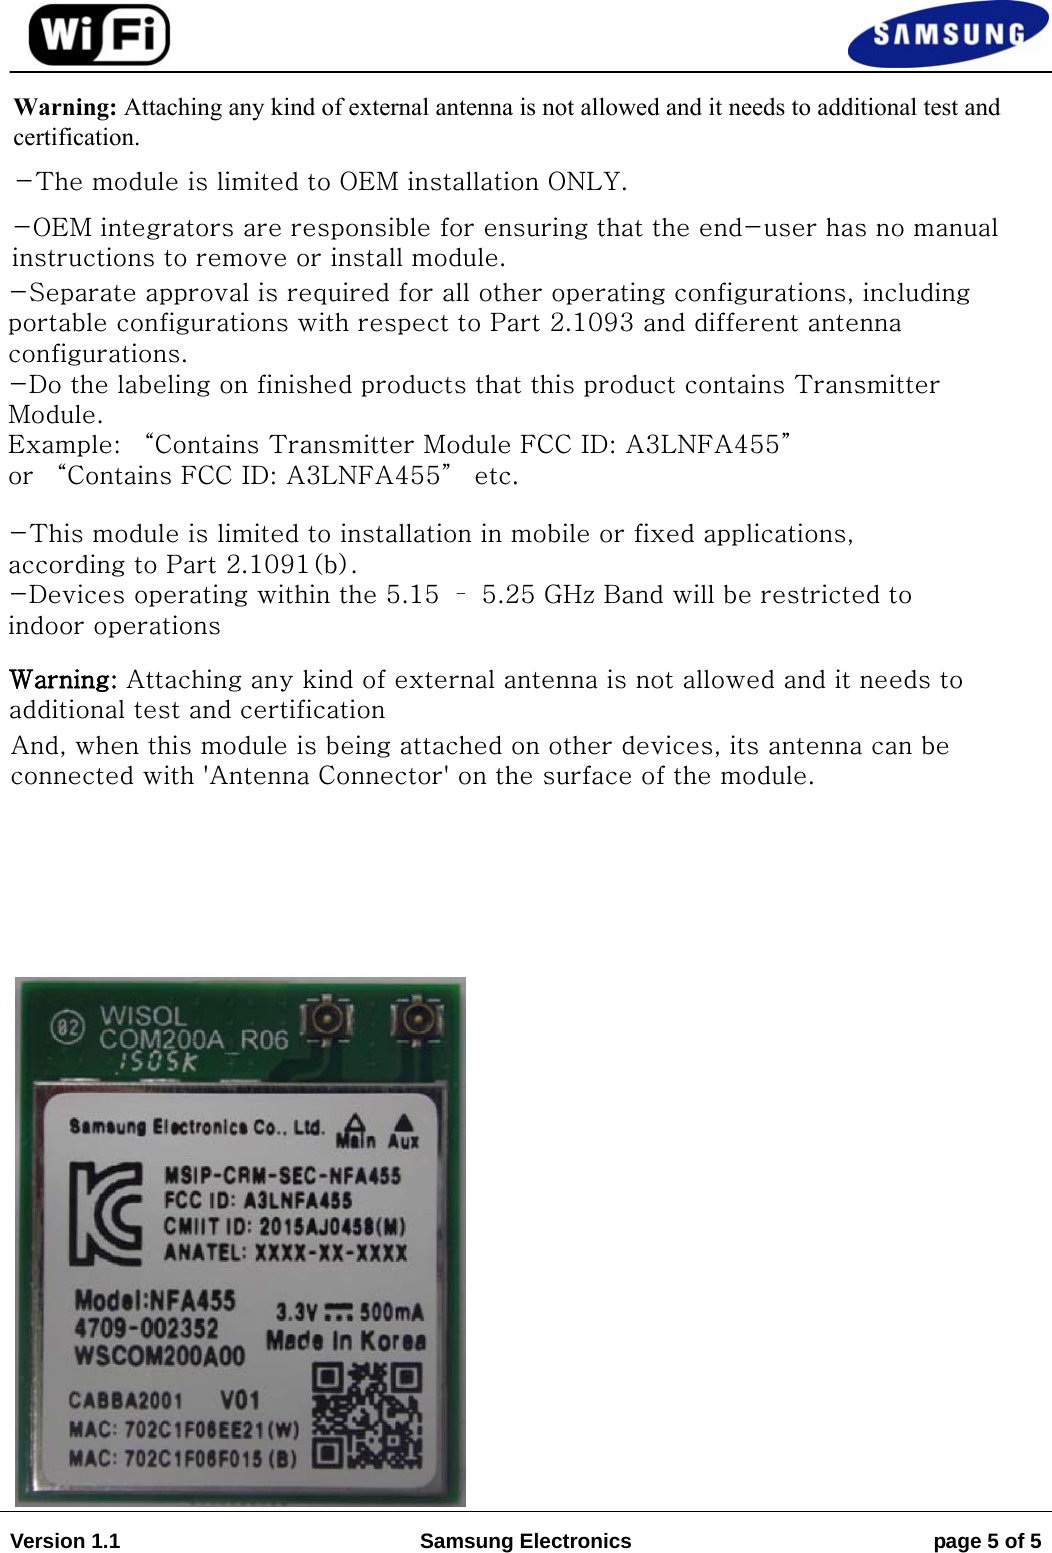 Version 1.1  Samsung Electronics  page 5 of 5Warning: Attaching any kind of external antenna is not allowed and it needs to additional test and    certification.-The module is limited to OEM installation ONLY. -OEM integrators are responsible for ensuring that the end-user has no manual instructions to remove or install module.-Separate approval is required for all other operating configurations, including portable configurations with respect to Part 2.1093 and different antenna configurations.-Do the labeling on finished products that this product contains Transmitter Module.Example: “Contains Transmitter Module FCC ID: A3LNFA455” or “Contains FCC ID: A3LNFA455” etc.-This module is limited to installation in mobile or fixed applications, according to Part 2.1091(b).-Devices operating within the 5.15 – 5.25 GHz Band will be restricted to indoor operationsWarning: Attaching any kind of external antenna is not allowed and it needs to additional test and certification And, when this module is being attached on other devices, its antenna can be connected with &apos;Antenna Connector&apos; on the surface of the module. 